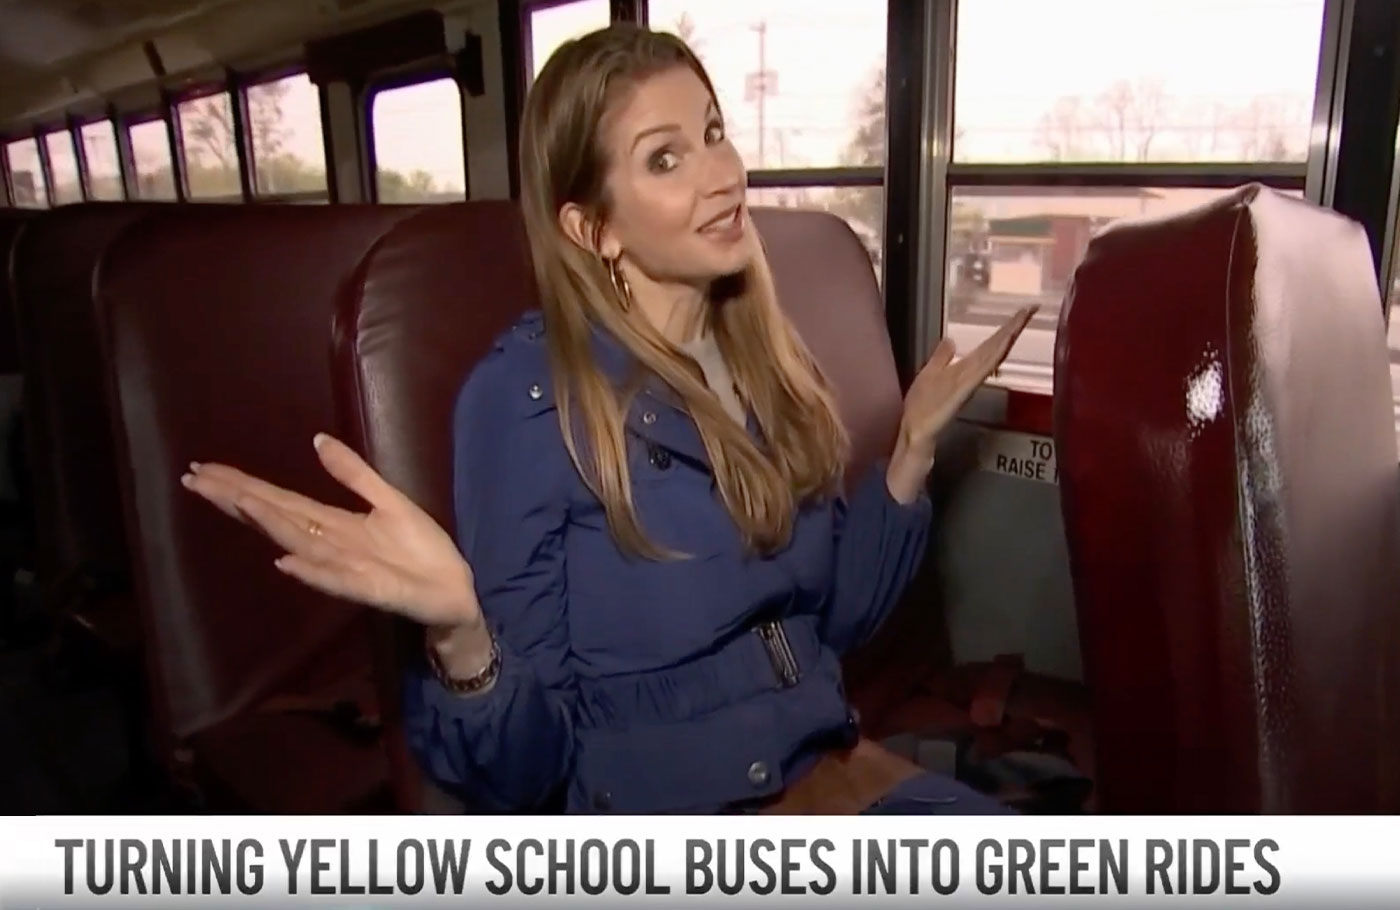 New York City Begins Converting School Buses Into Electric